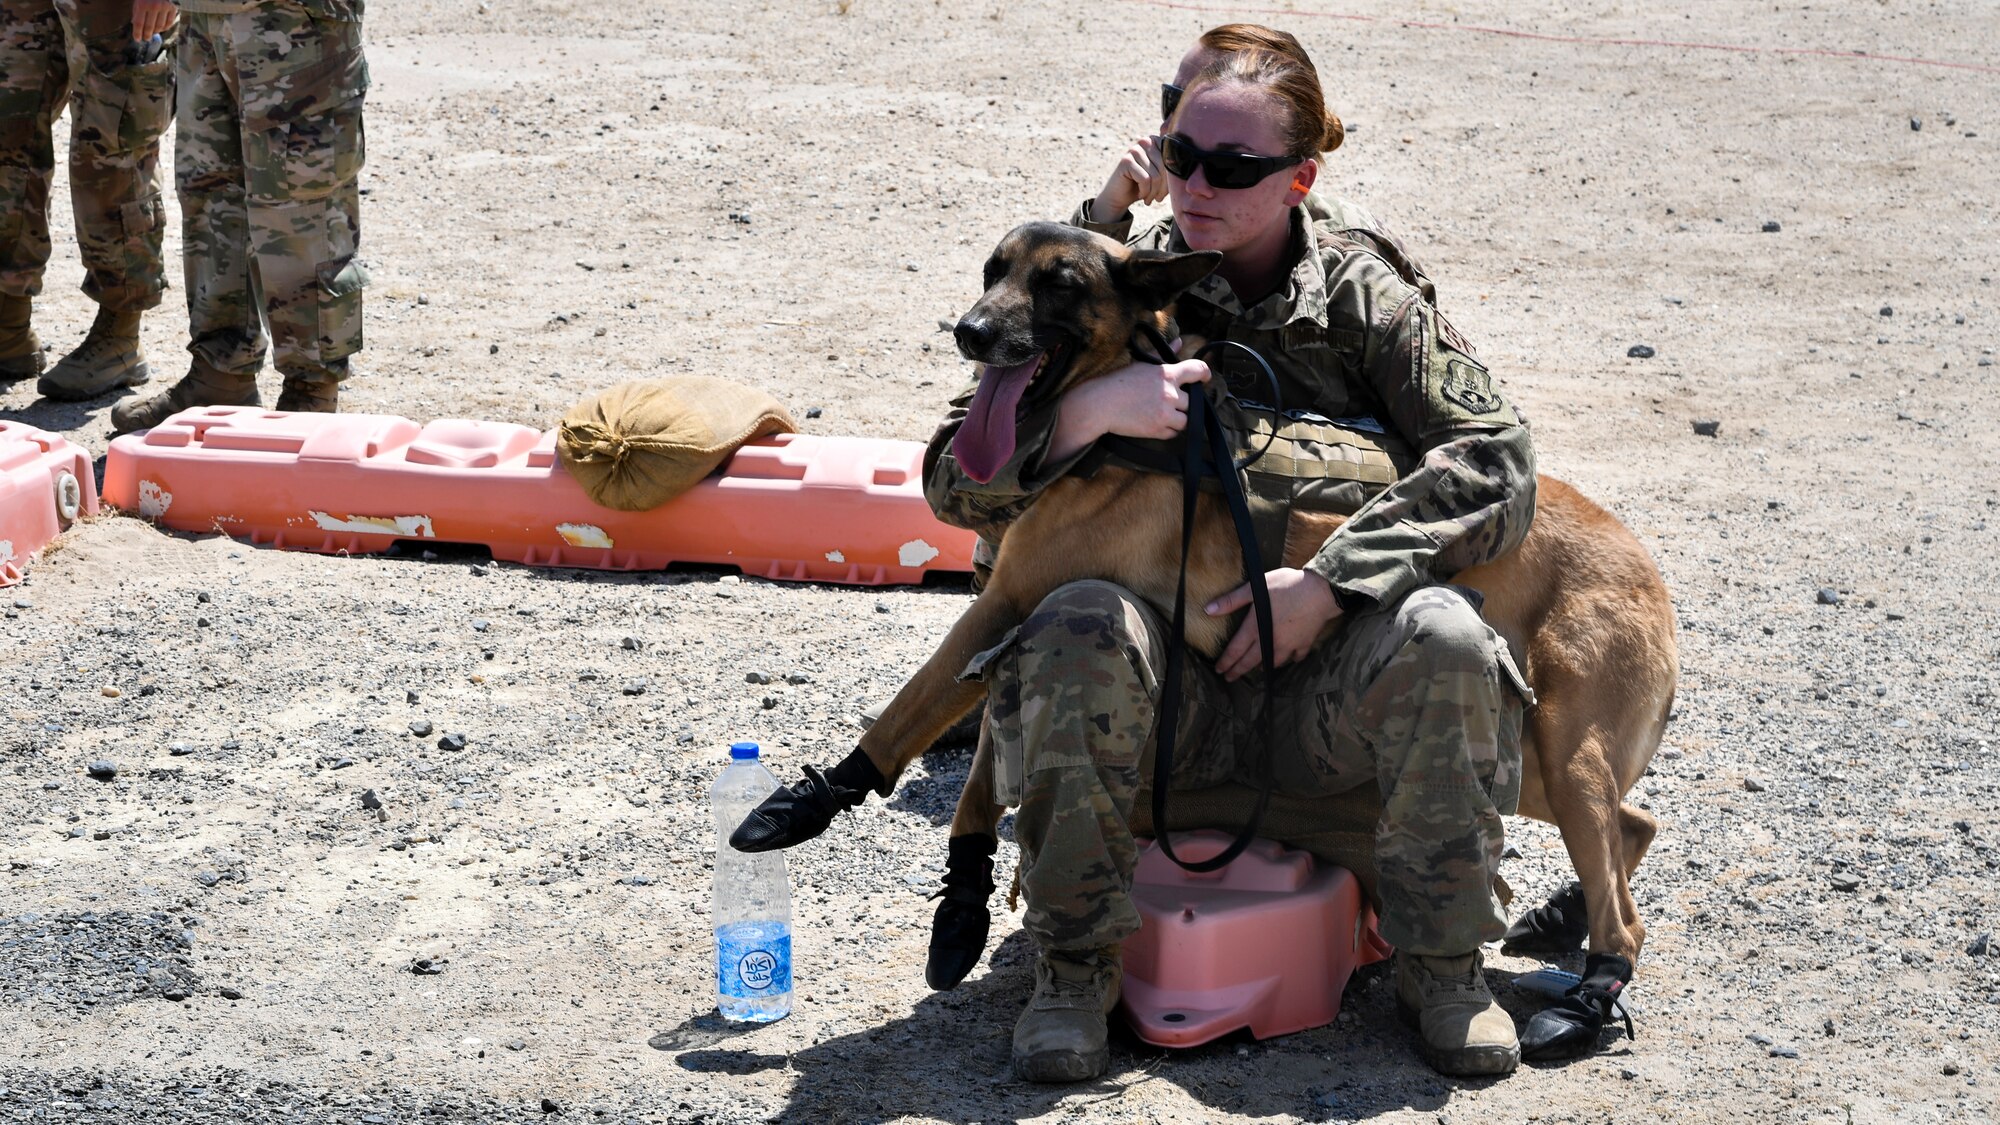 U.S. Air Force Staff Sgt. Christina Hilliary, 407th Expeditionary Security Forces Squadron military working dog handler, takes a break with her MWD during a medical evacuation exercise at Ali Al Salem Air Base, Kuwait, Sept. 13, 2019. The exercise included veterinarian clinical specialist with the 149th Medical Detachment Veterinary Service Support Unit; medical first responders with the 386th Expeditionary Medical Group and more than 15 military working dog teams from various locations around the U.S. Central Command area of responsibility. (U.S. Air Force photo by Staff Sgt. Mozer O. Da Cunha)